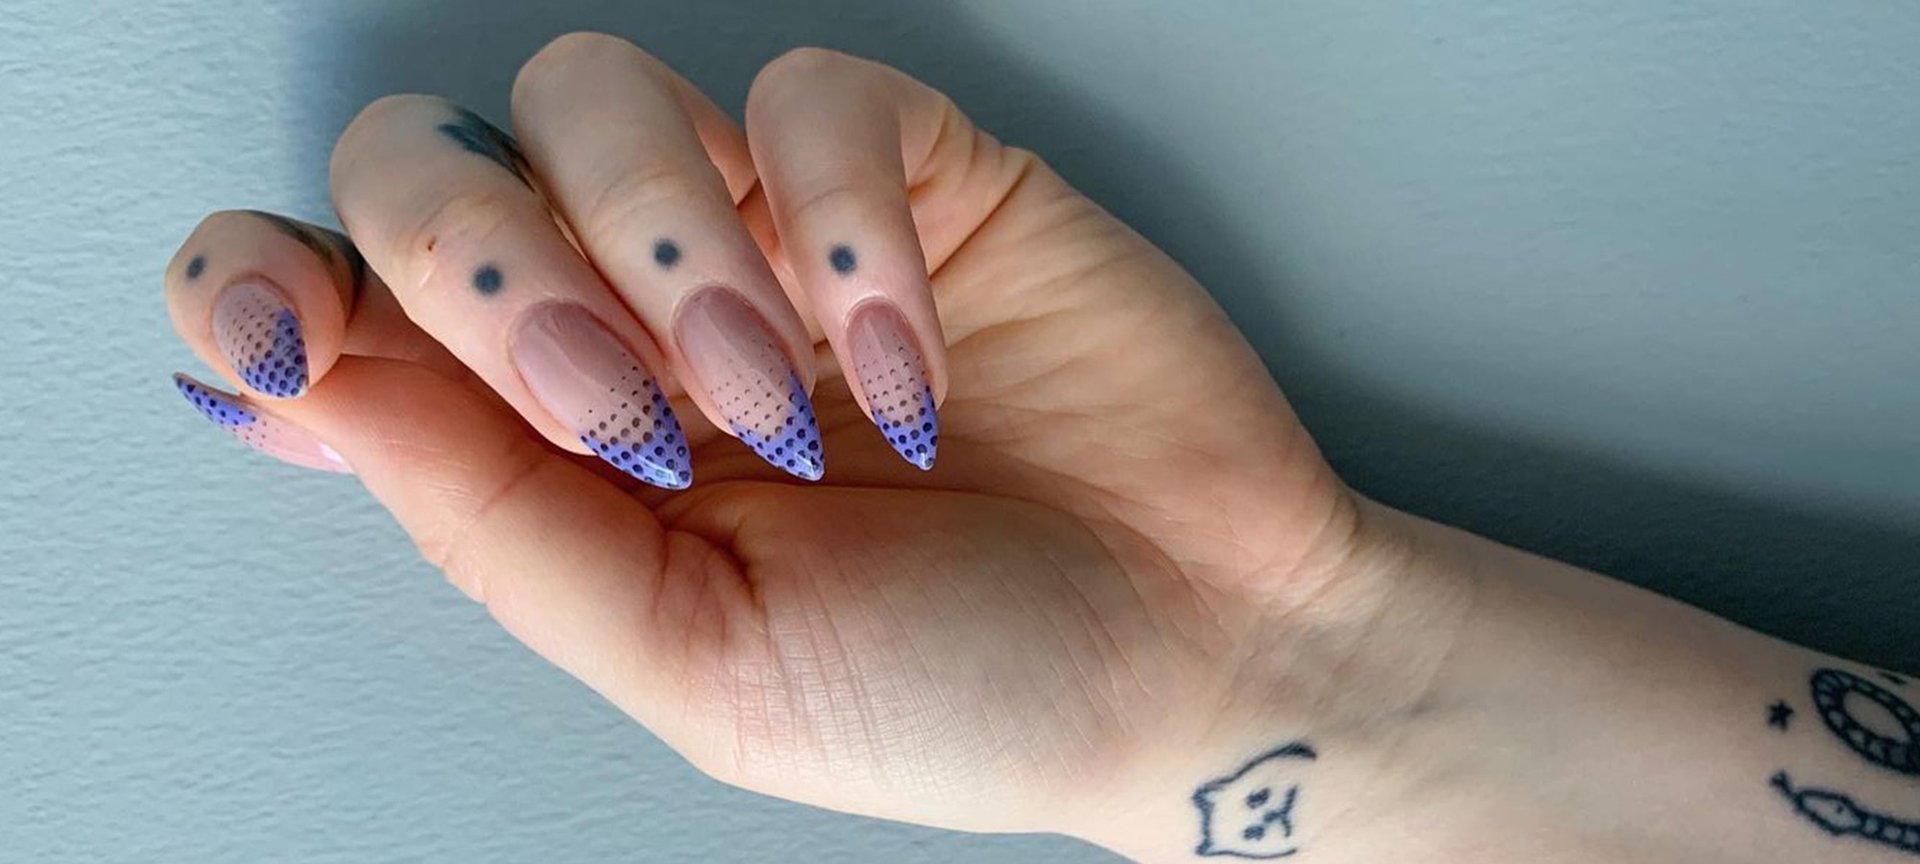 Top 6 Problems With Acrylic Nails and How to Remedy Them | DeEnterprises